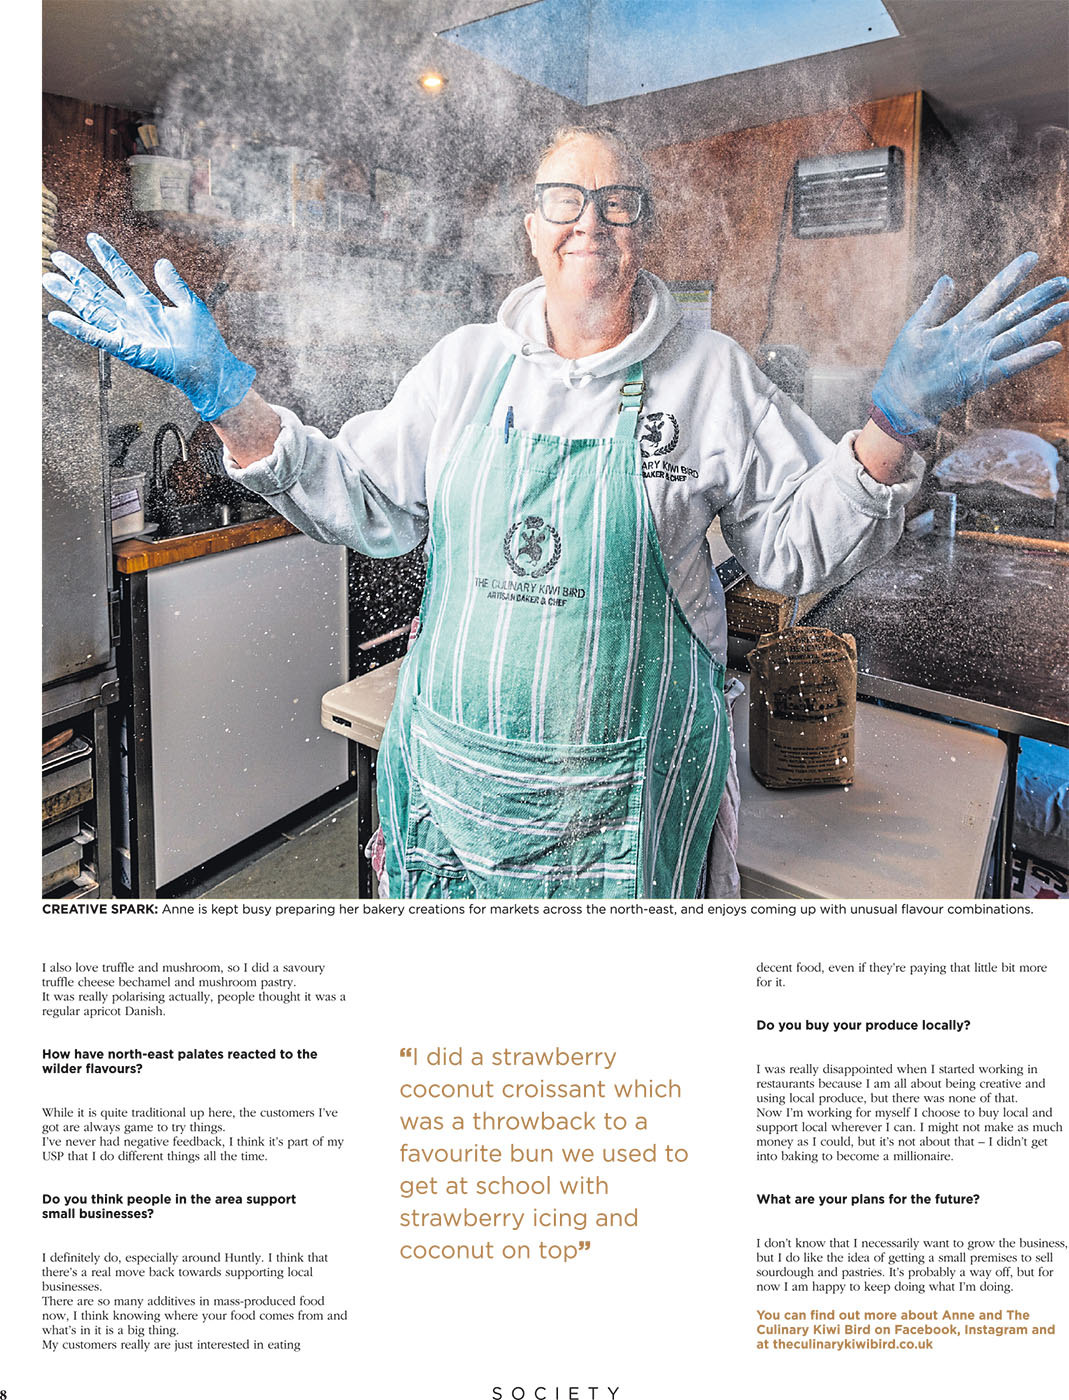 Press Photographer Aberdeen - Scott Cameron Baxter. The Culinary Kiwi Bird Baker. A woman claps her hands with flour creating a cloud of powder. she smiles at the camera in her bakery, she is wearing a green and white striped apron with blue gloves. Picture taken by Food and drink photographer Scott Baxter, Aberdeen Scotland.